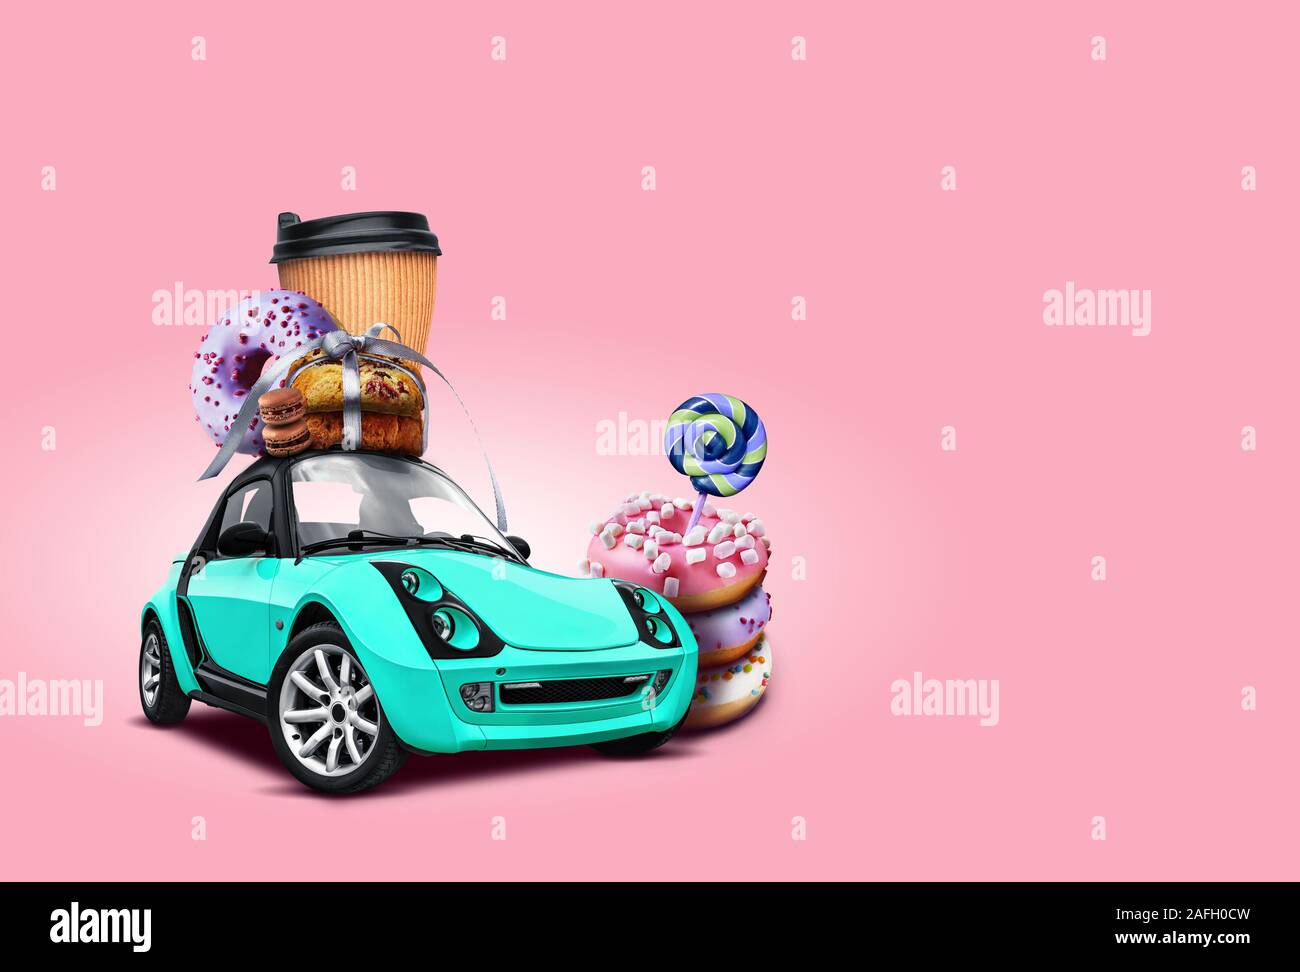 Turquoise car on pink background. Donuts, candy canes, coffee, cookies, chocolate macarons on the roof of it. Collage. Copy space, close-up. Stock Photo